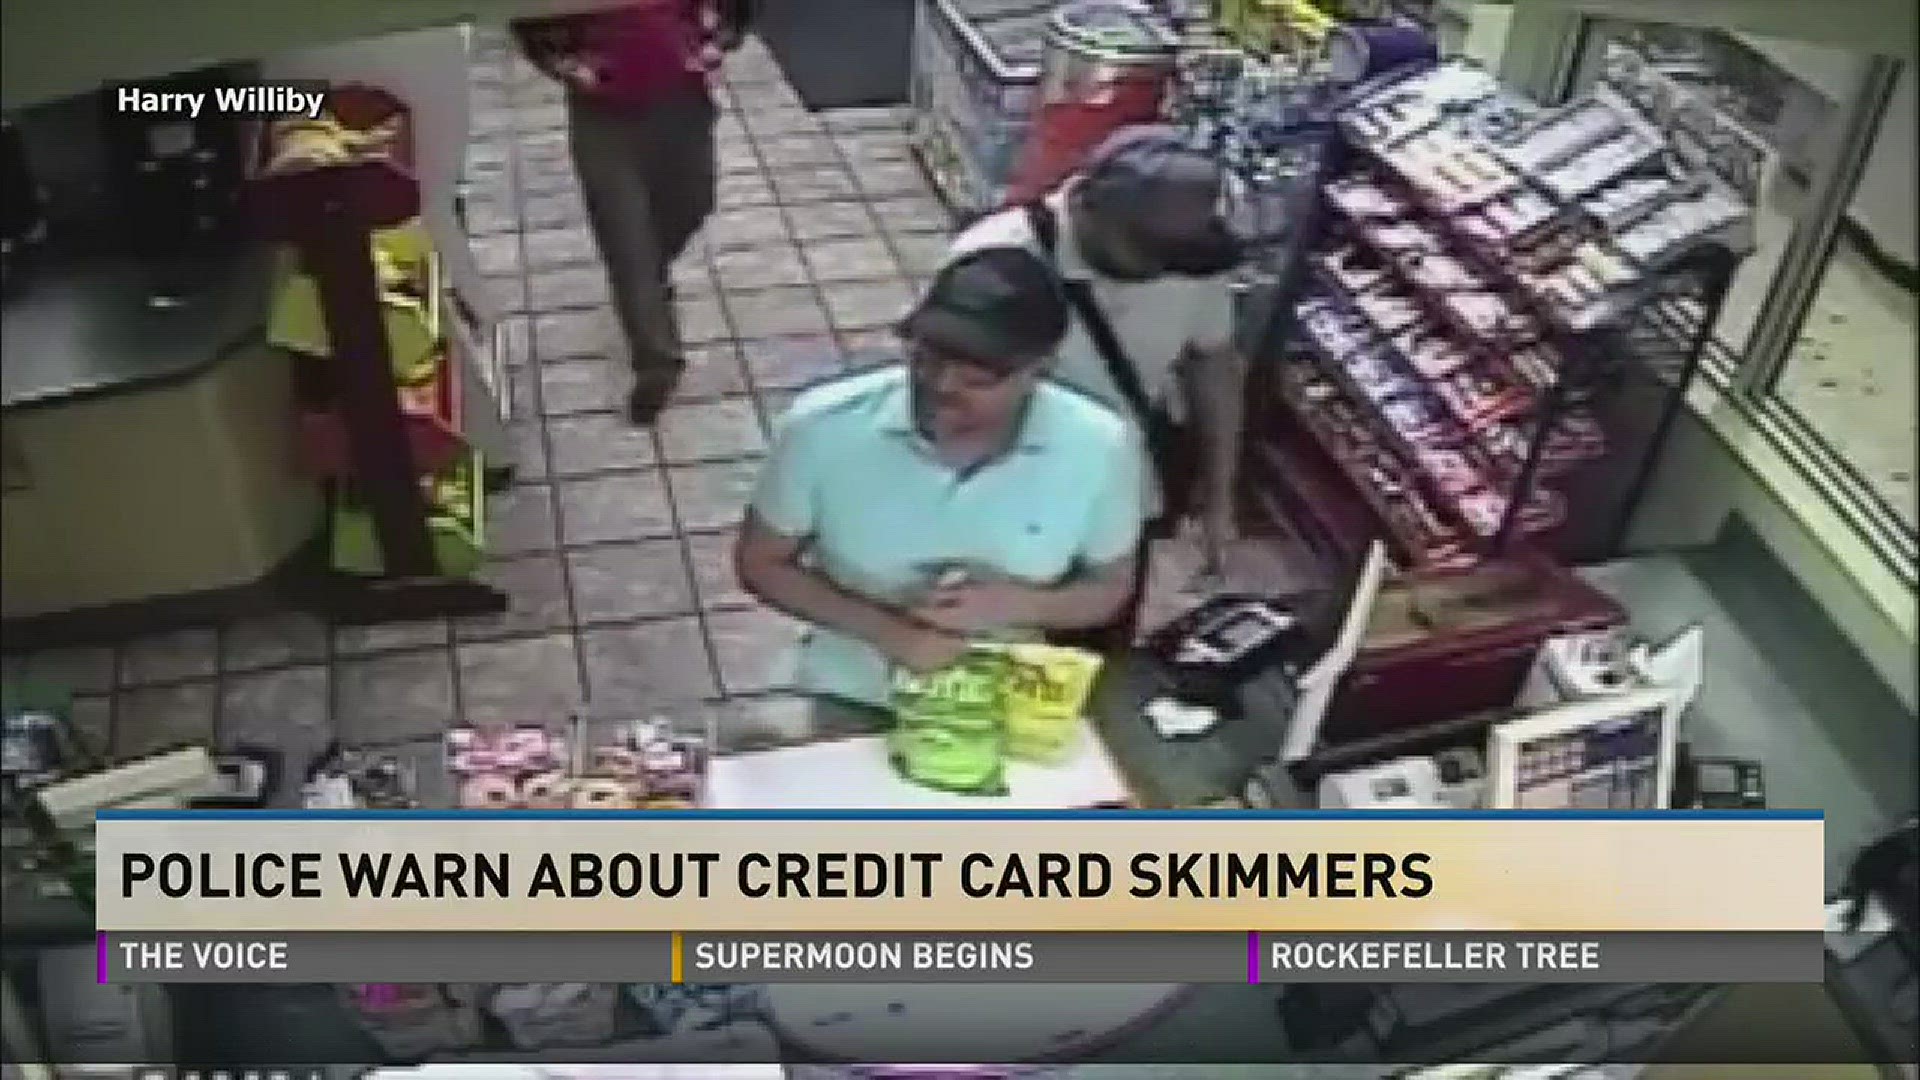 Authorities believe at least $25,000 was stolen using skimmers in the last several months throughout East Tennessee.